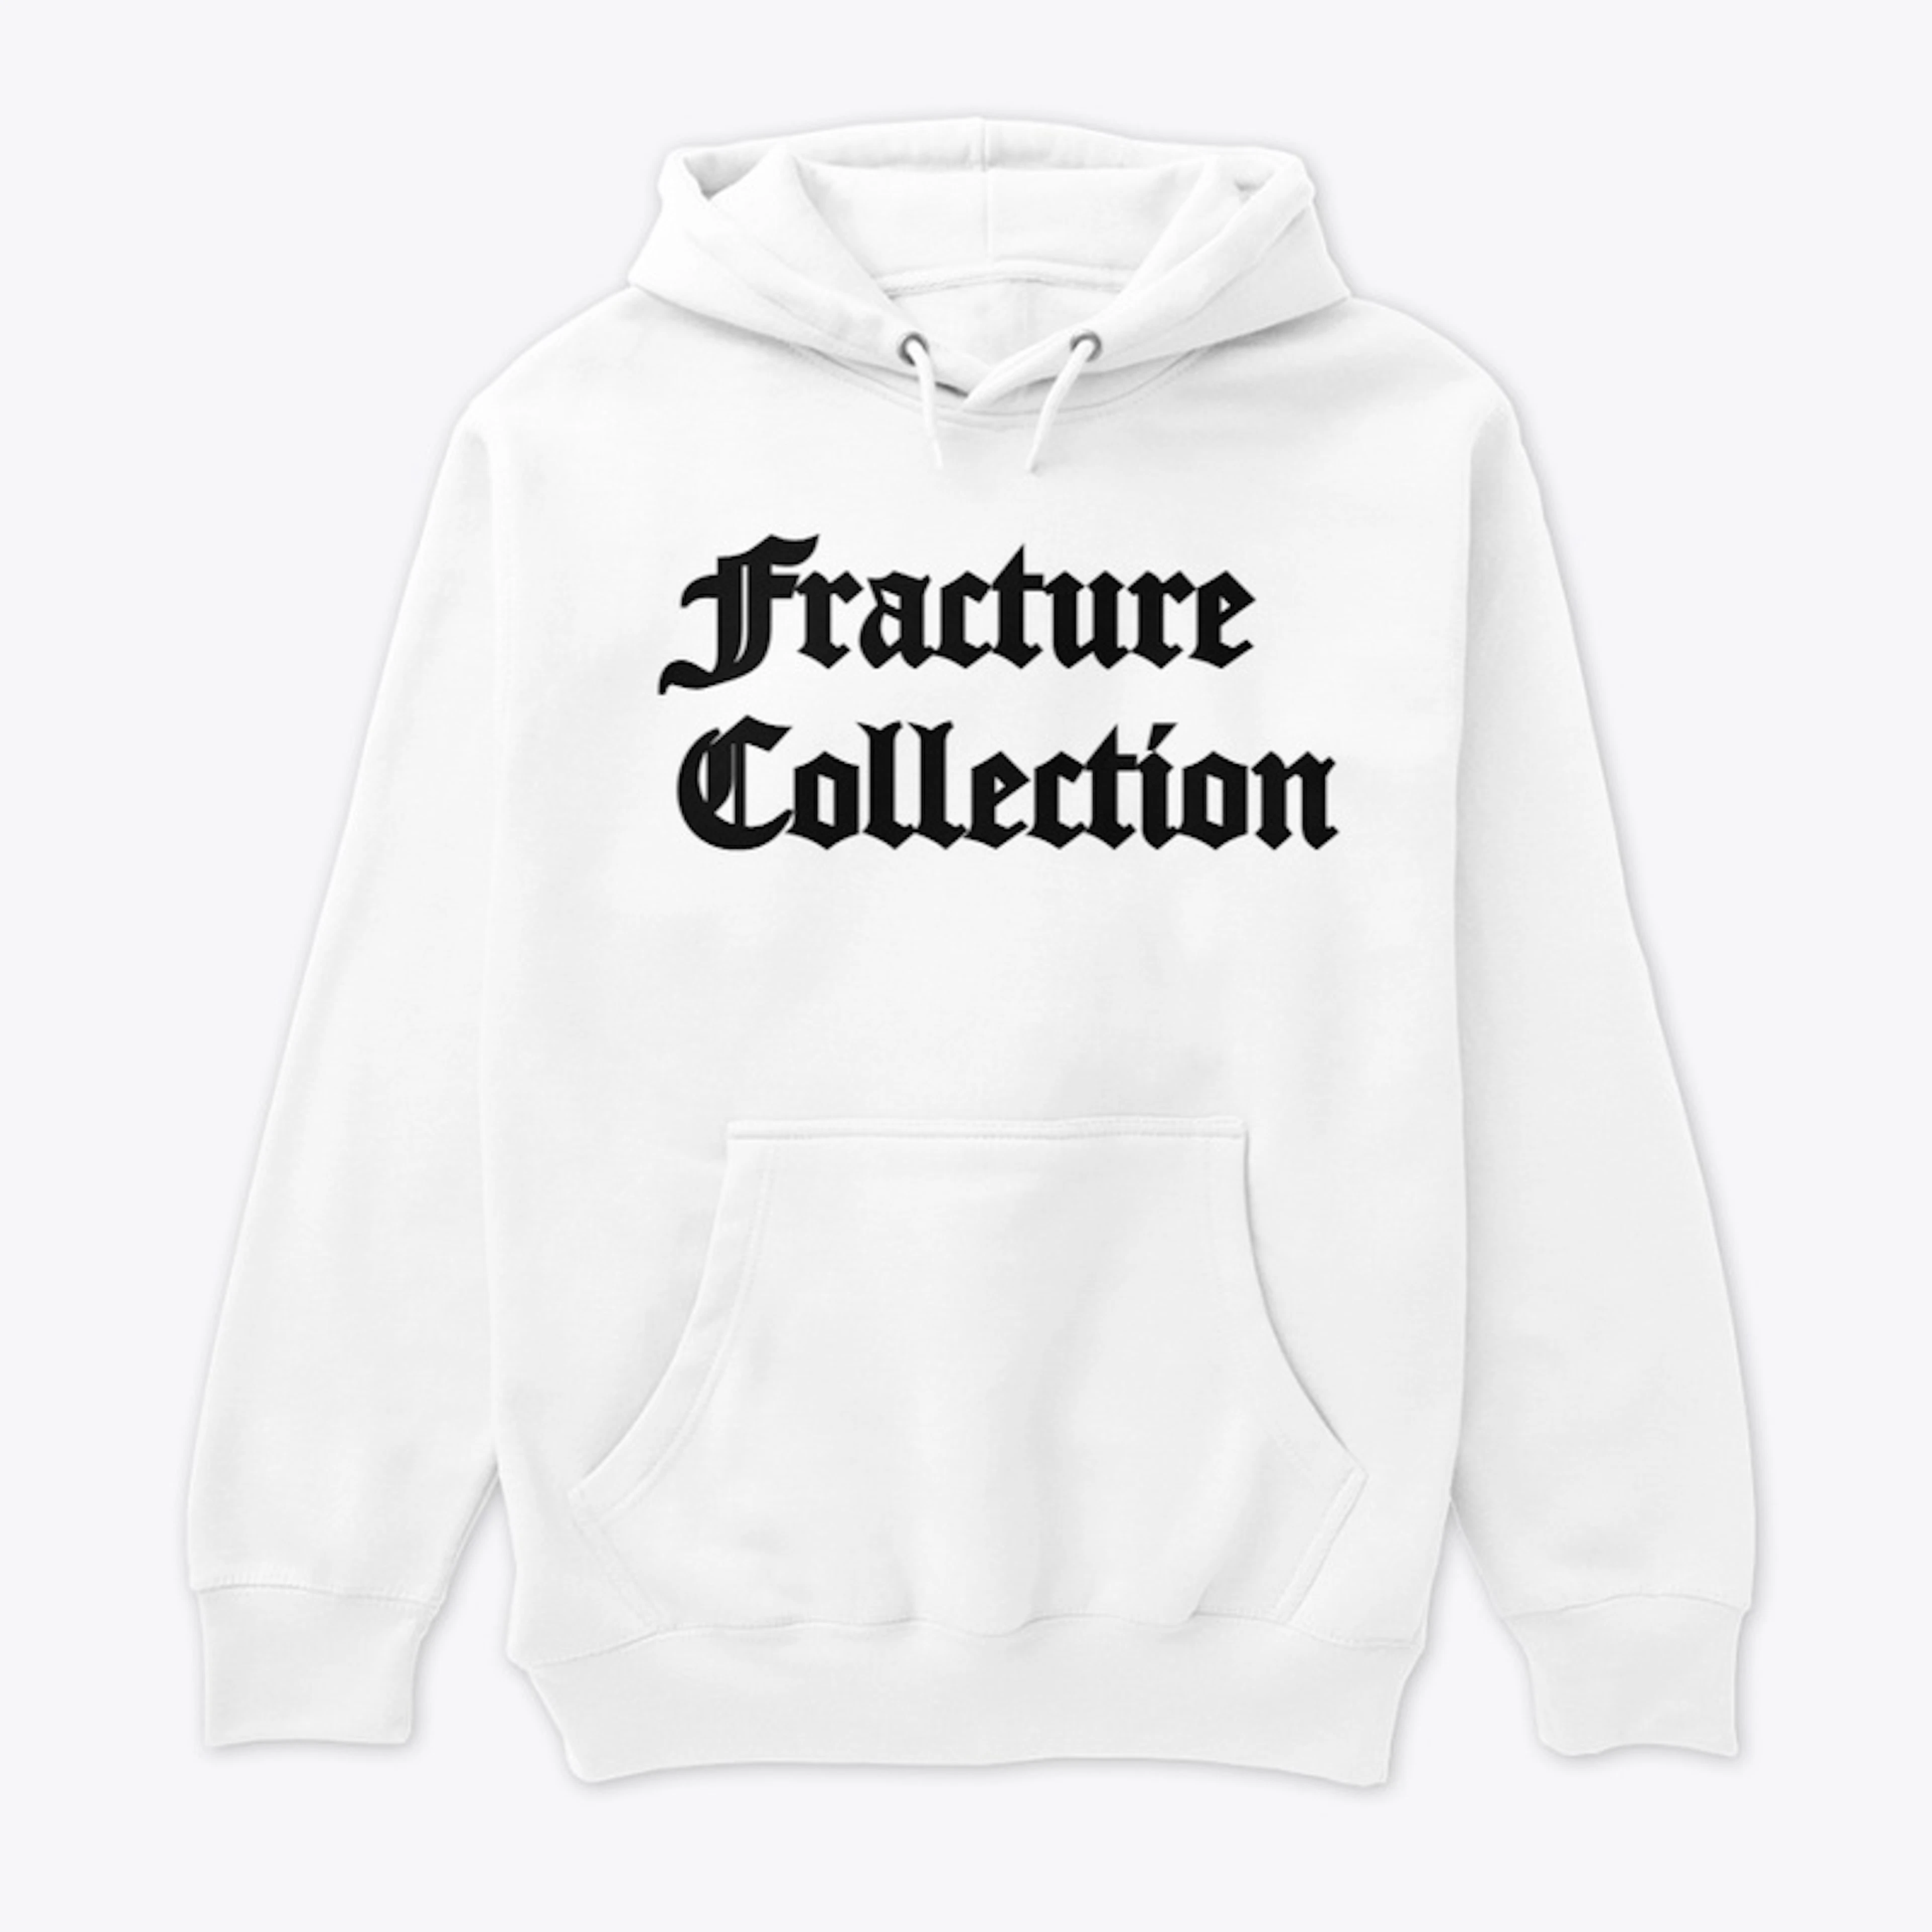 Fracture Collection